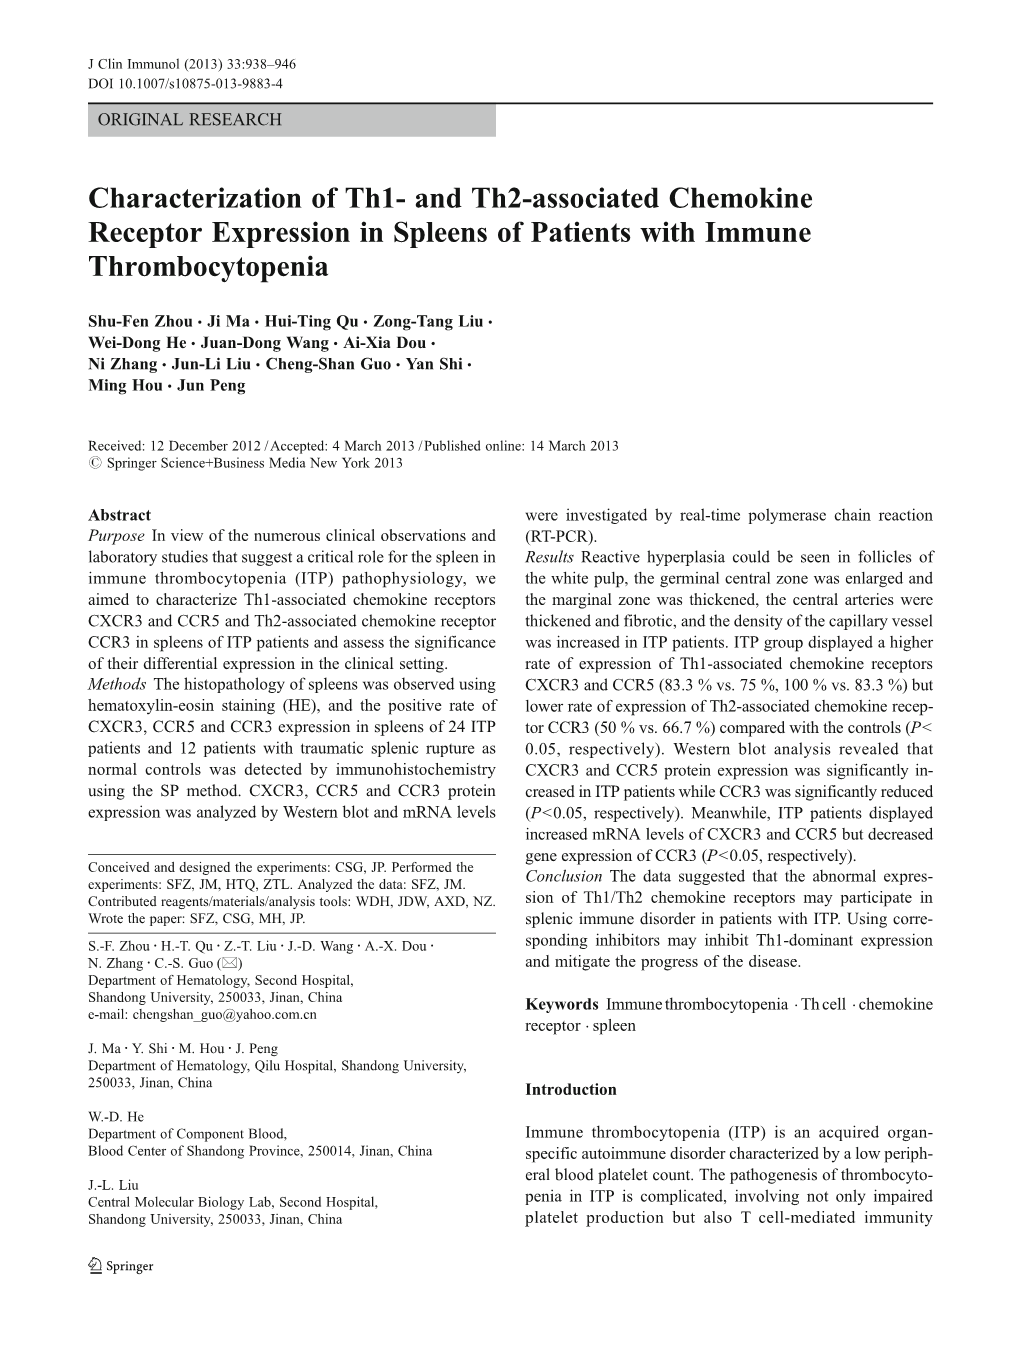 And Th2-Associated Chemokine Receptor Expression in Spleens of Patients with Immune Thrombocytopenia